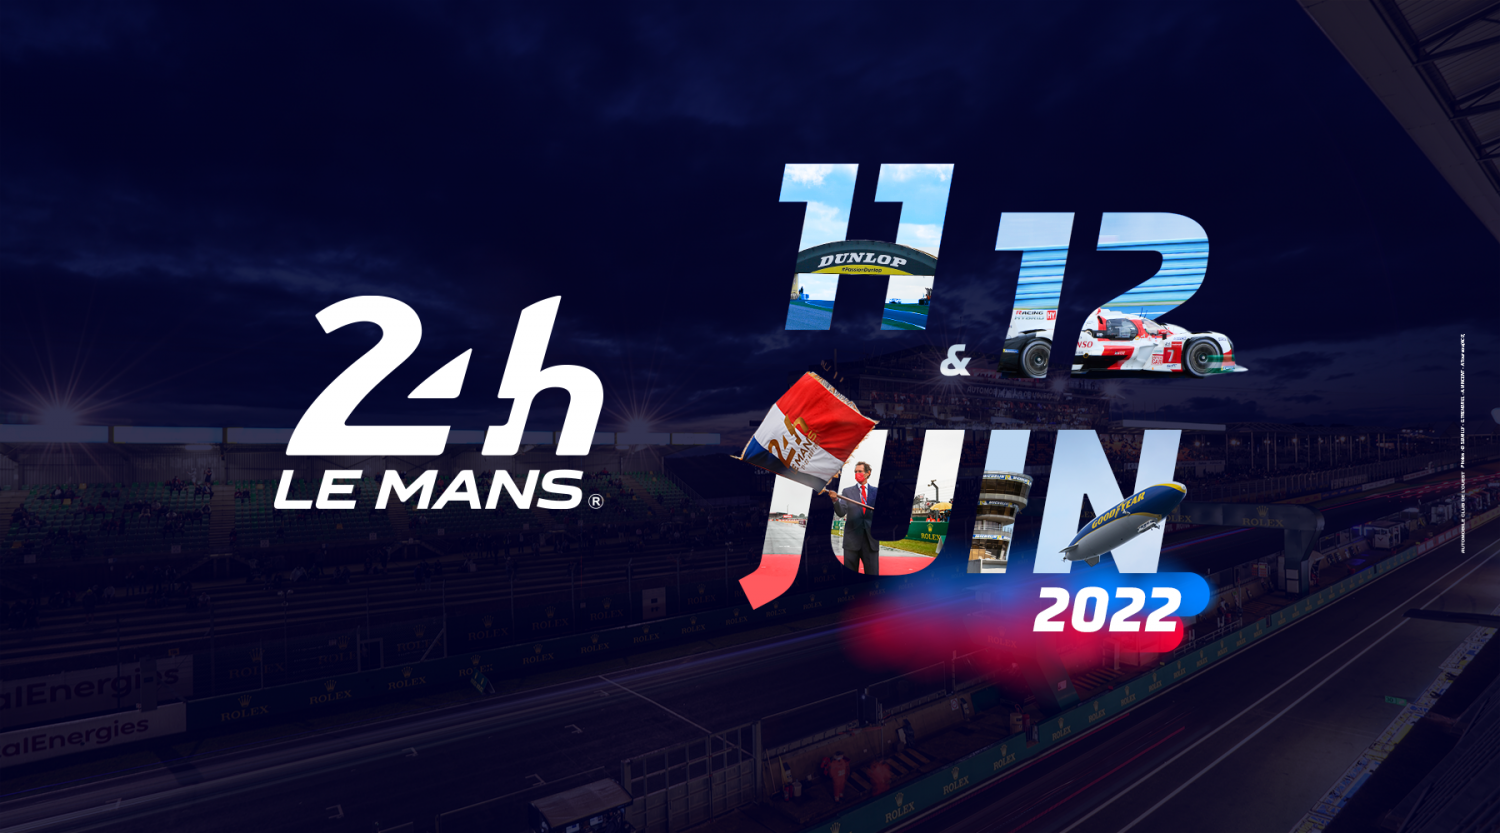 Le Mans 2022 Schedule See You On 11-12 June 2022 For The 90Th 24 Hours Of Le Mans! | 24H-Lemans .Com